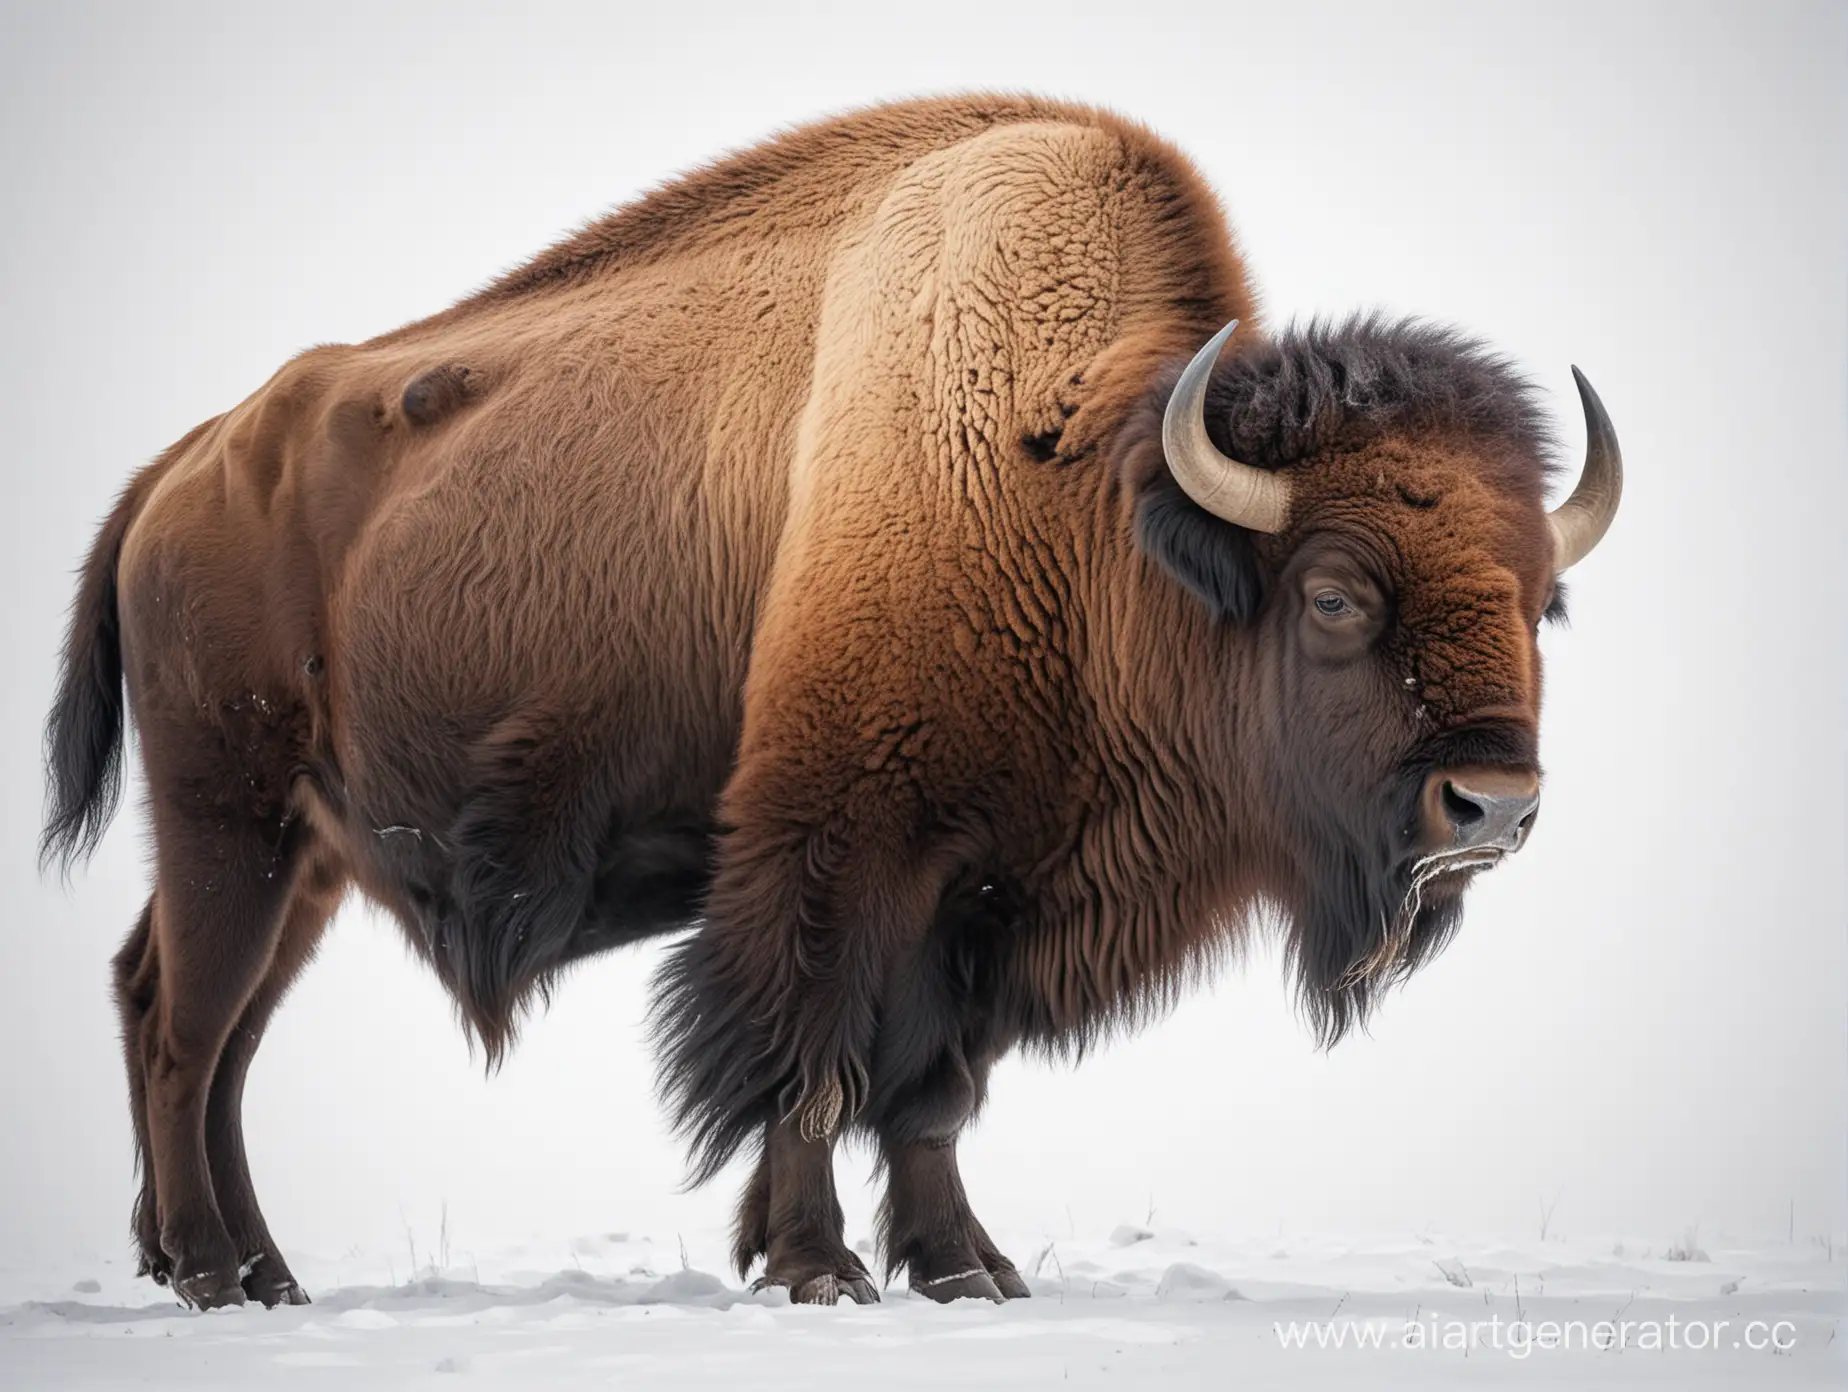 Majestic-Bison-Standing-Against-White-Background